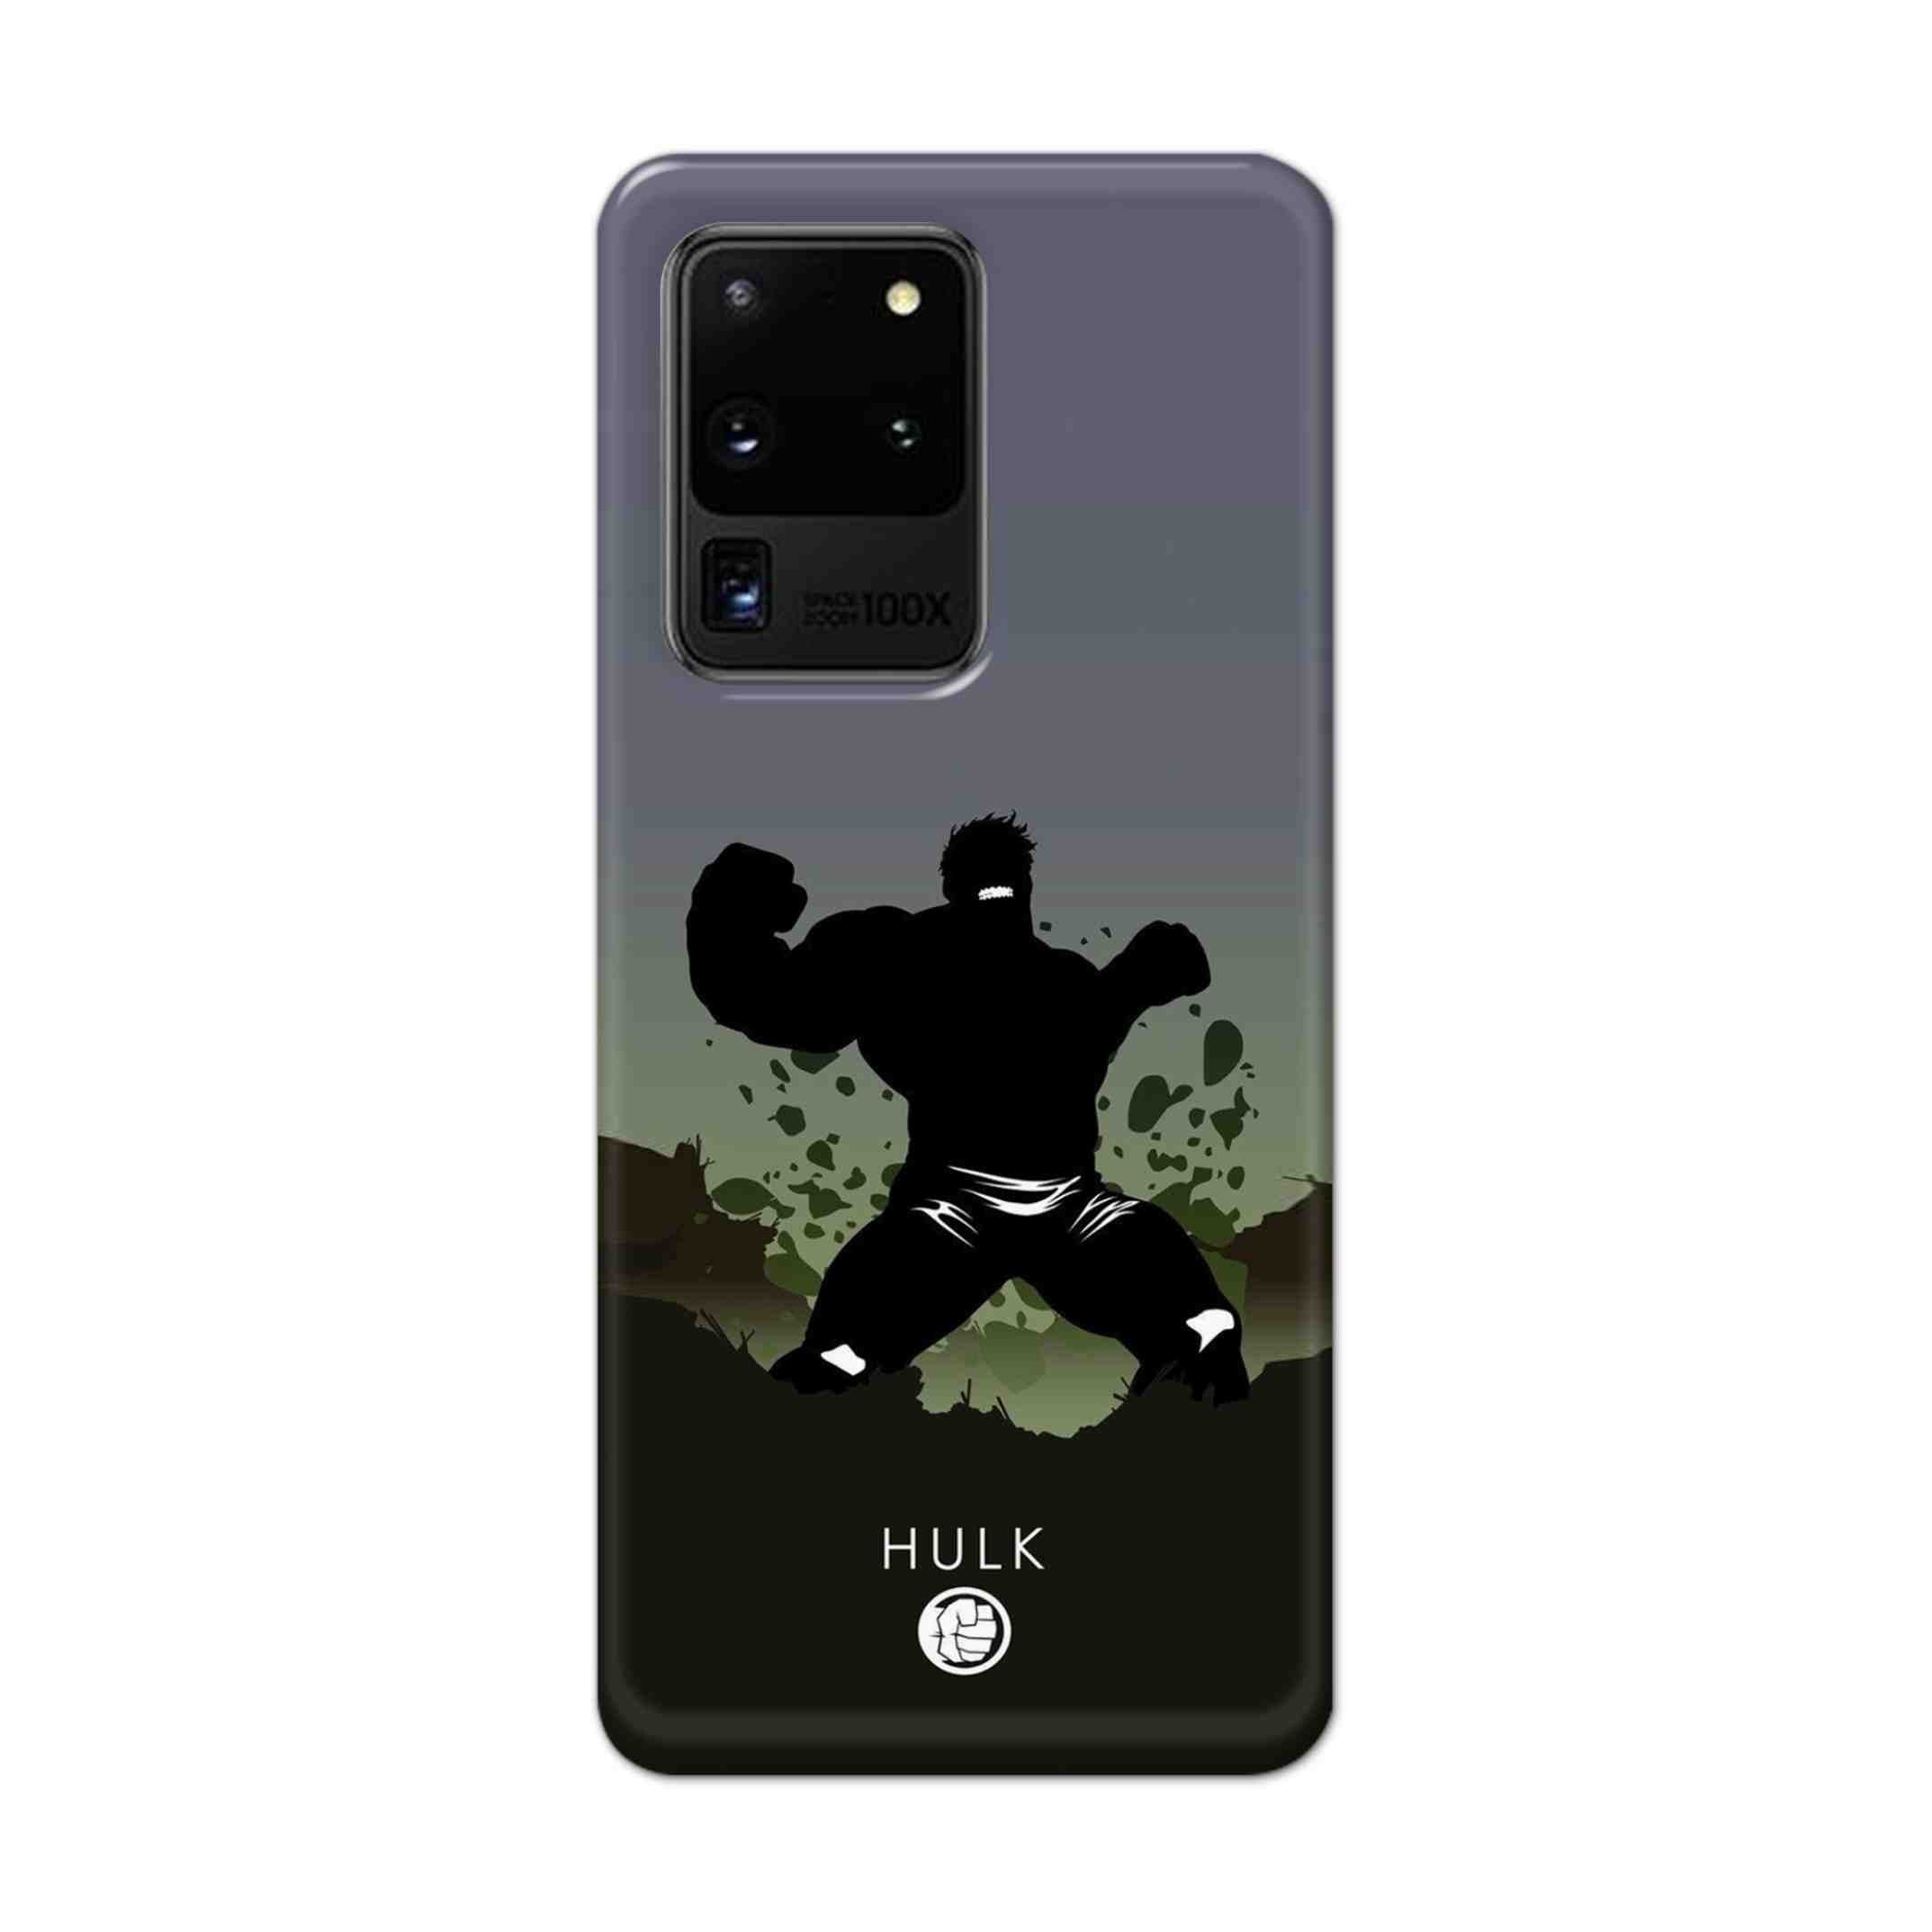 Buy Hulk Drax Hard Back Mobile Phone Case Cover For Samsung Galaxy S20 Ultra Online